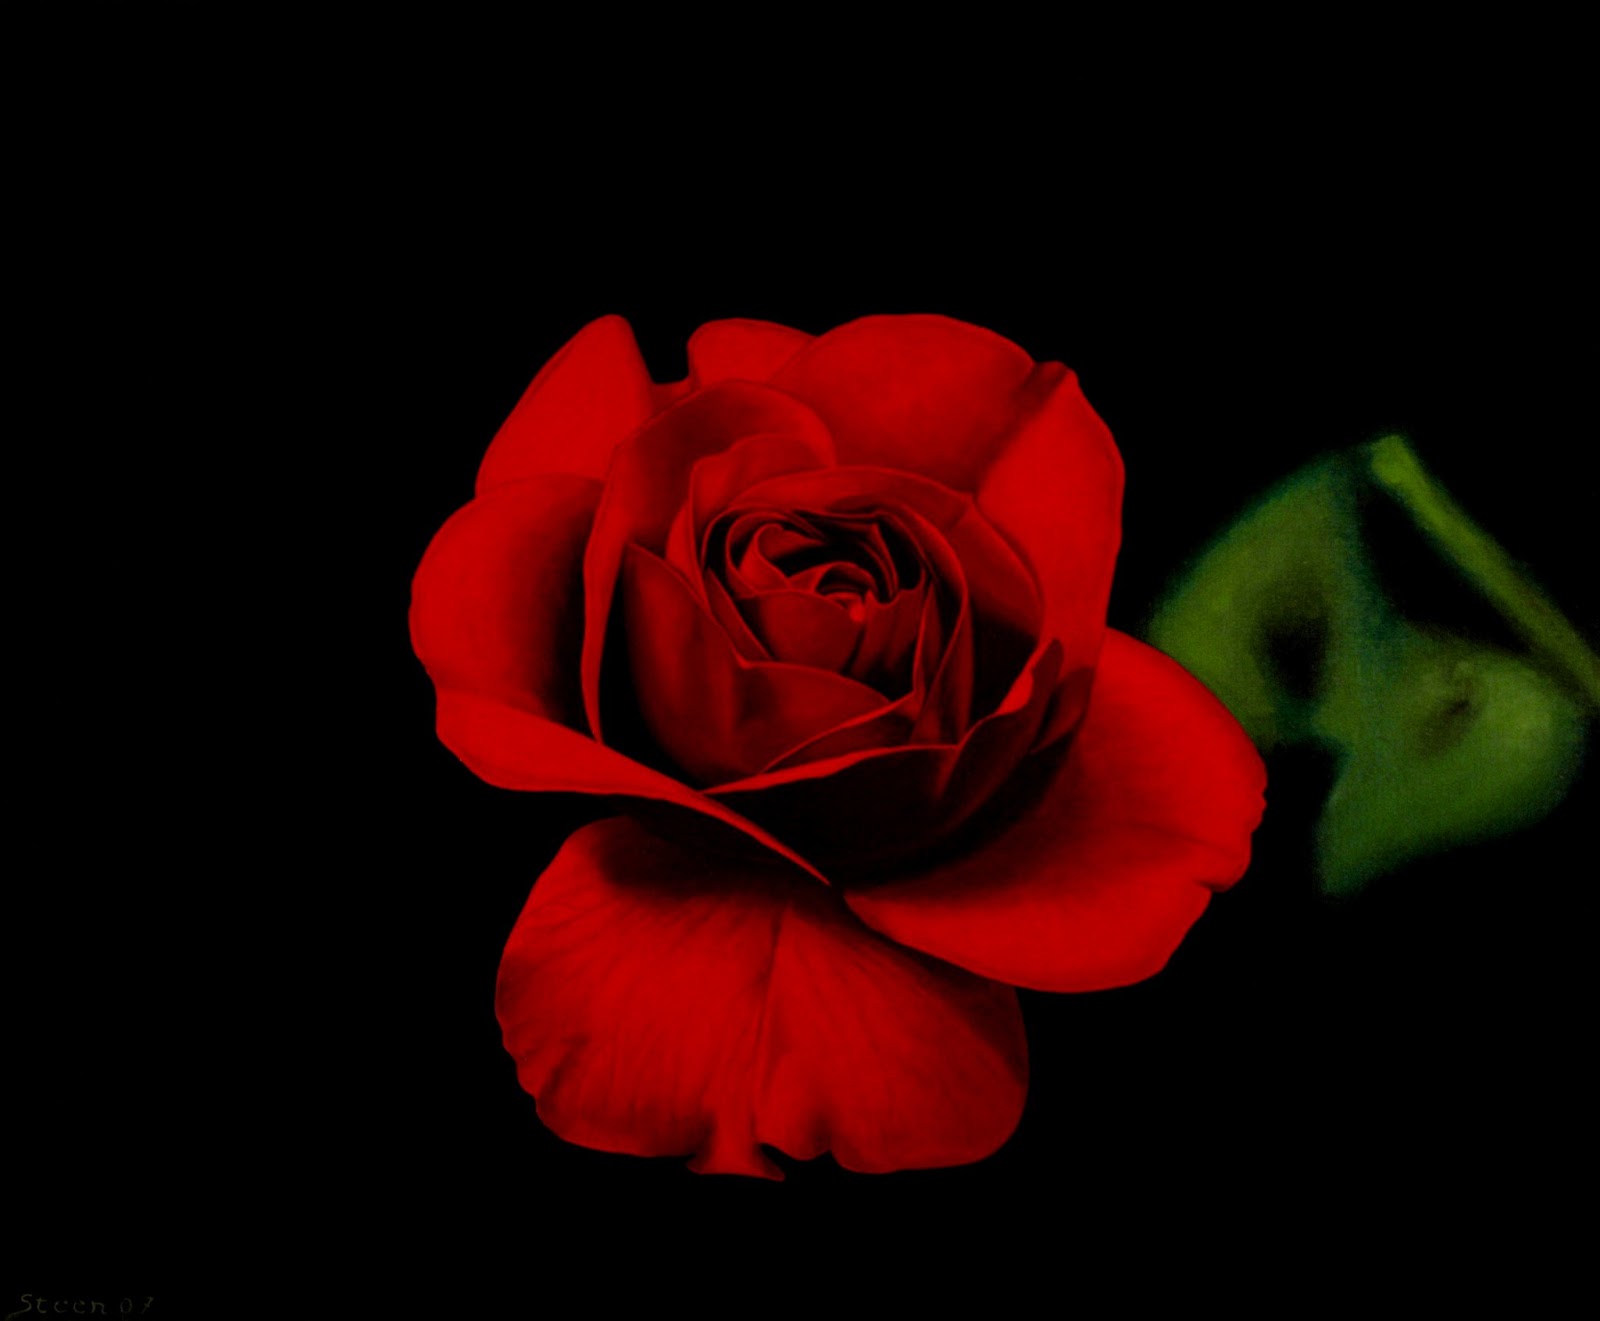 Red Rose On Black Background Oil Painting S 60x73cm